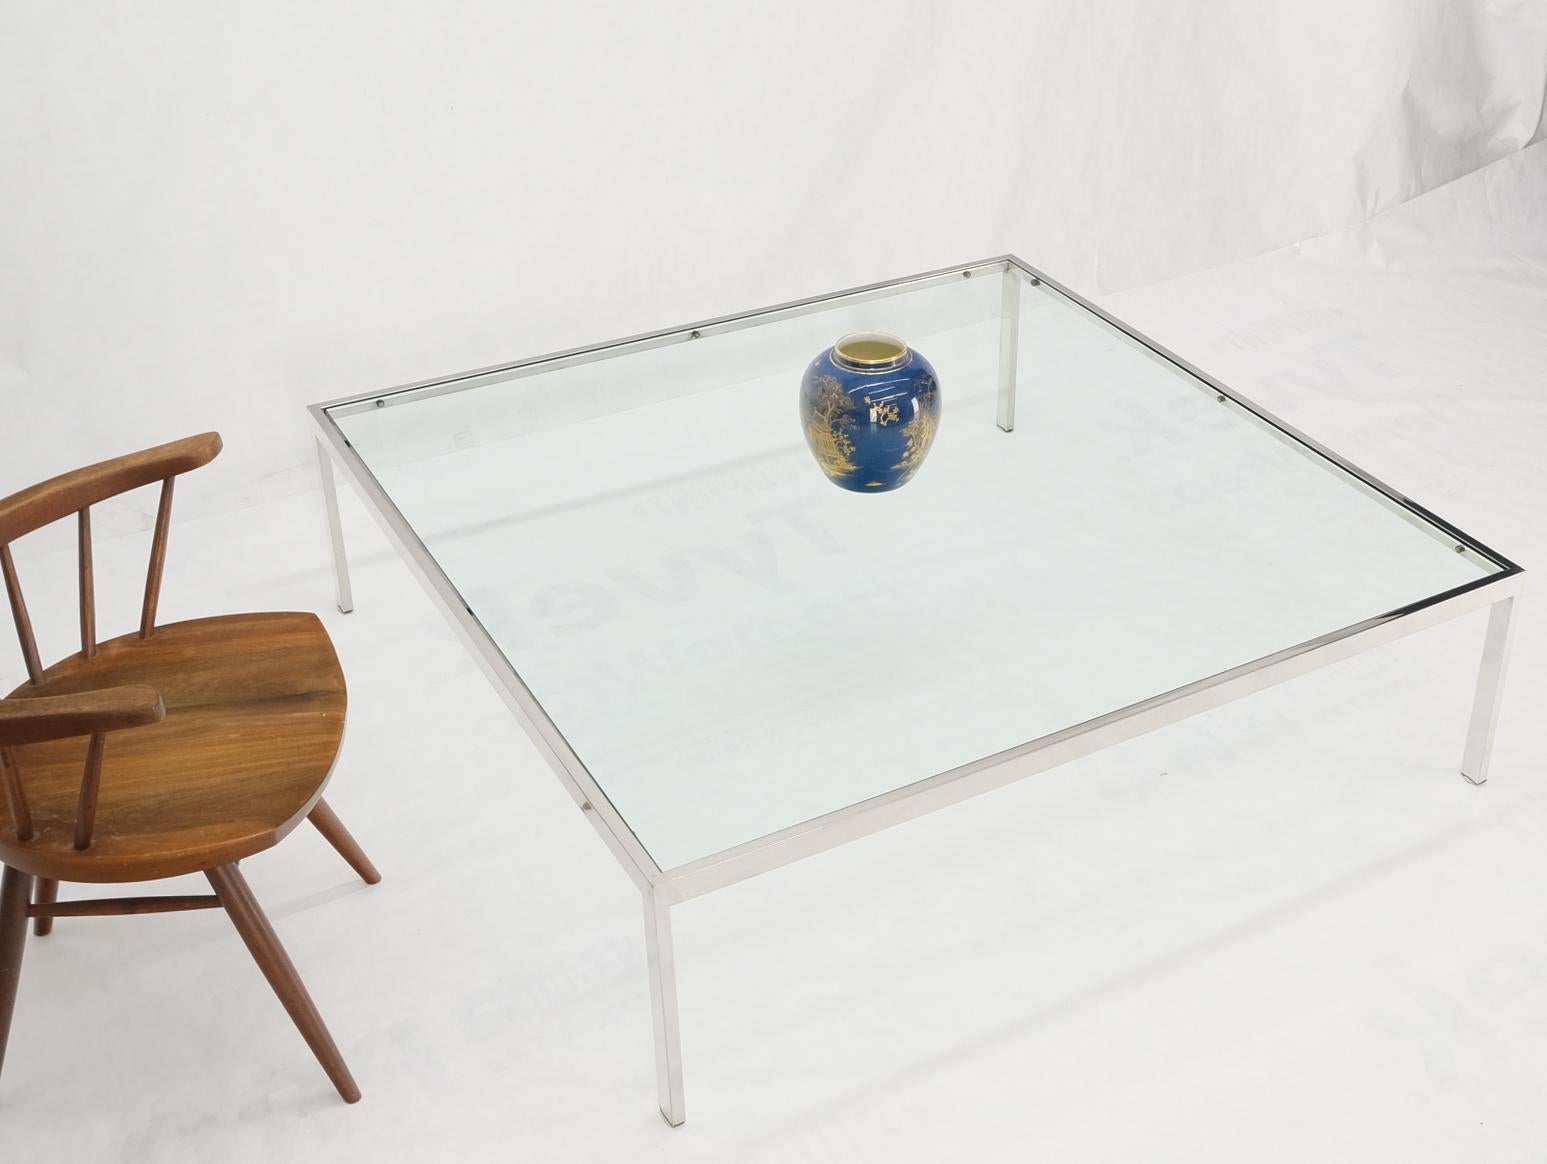 Mid-Century Modern large chrome polished stainless steel glass top square coffee table. Measure: 54